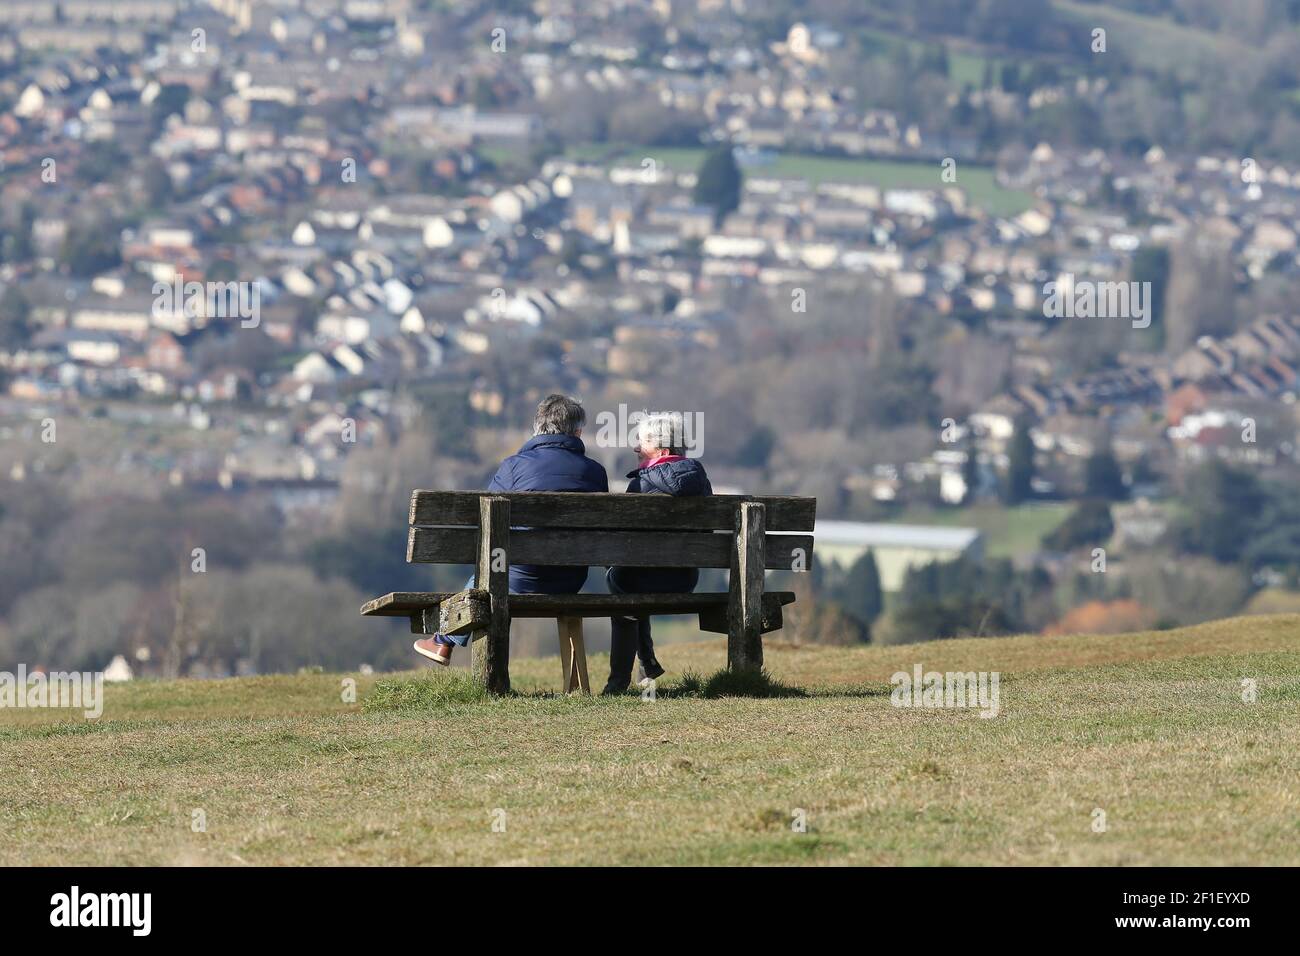 Stroud, UK, 8th March, 2021. UK Weather. Sunny day to meet with a friend on Rodborough Common in Gloucestershire as lockdown rules are easing. Credit: Gary Learmonth/Alamy Live News Stock Photo